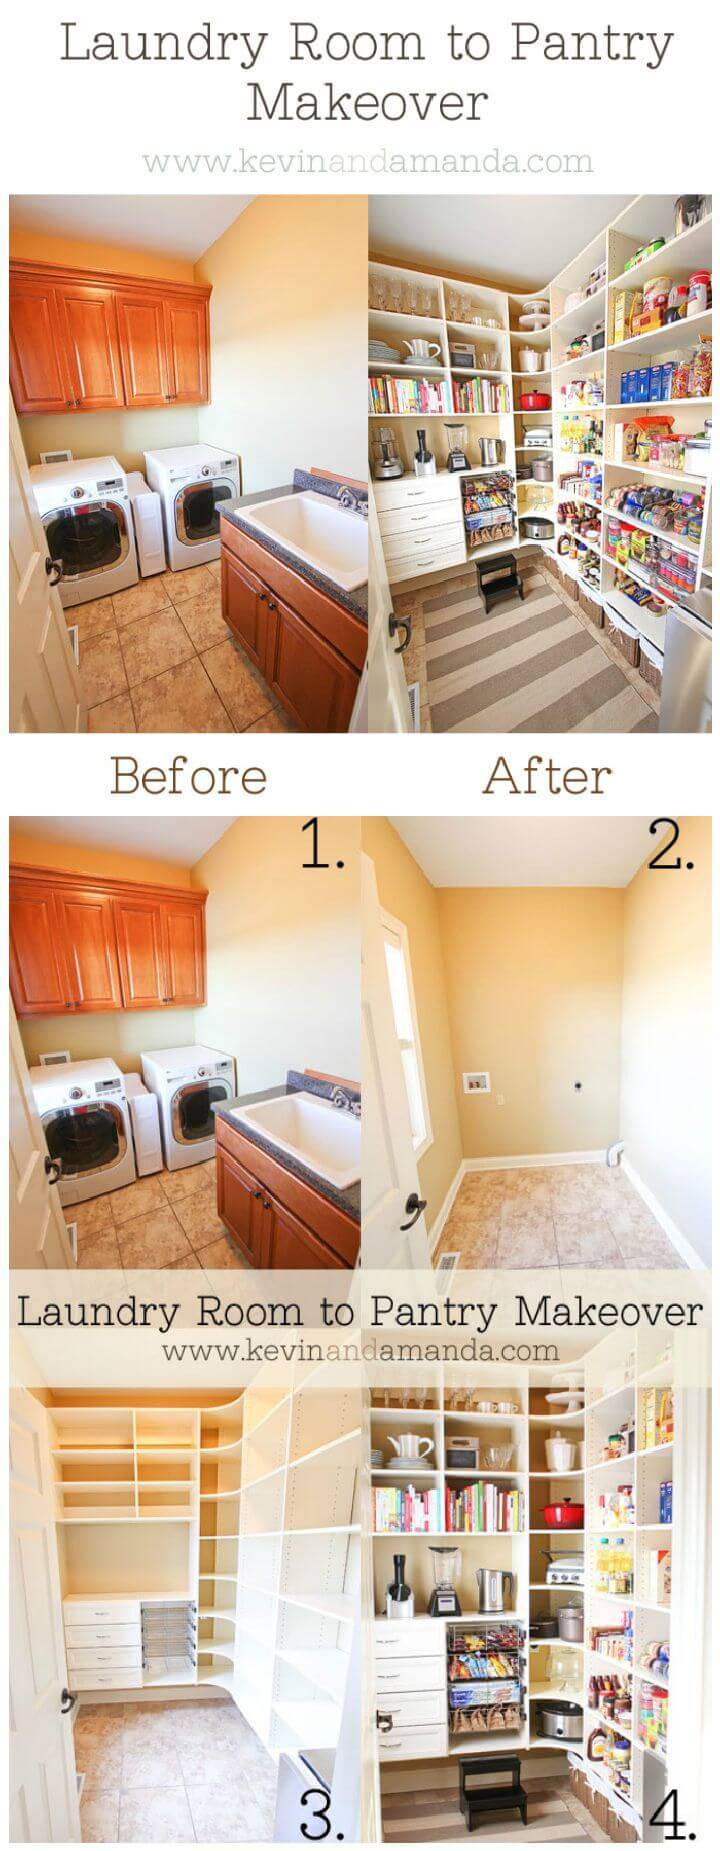 Pantry Makeover Before And After Photos!